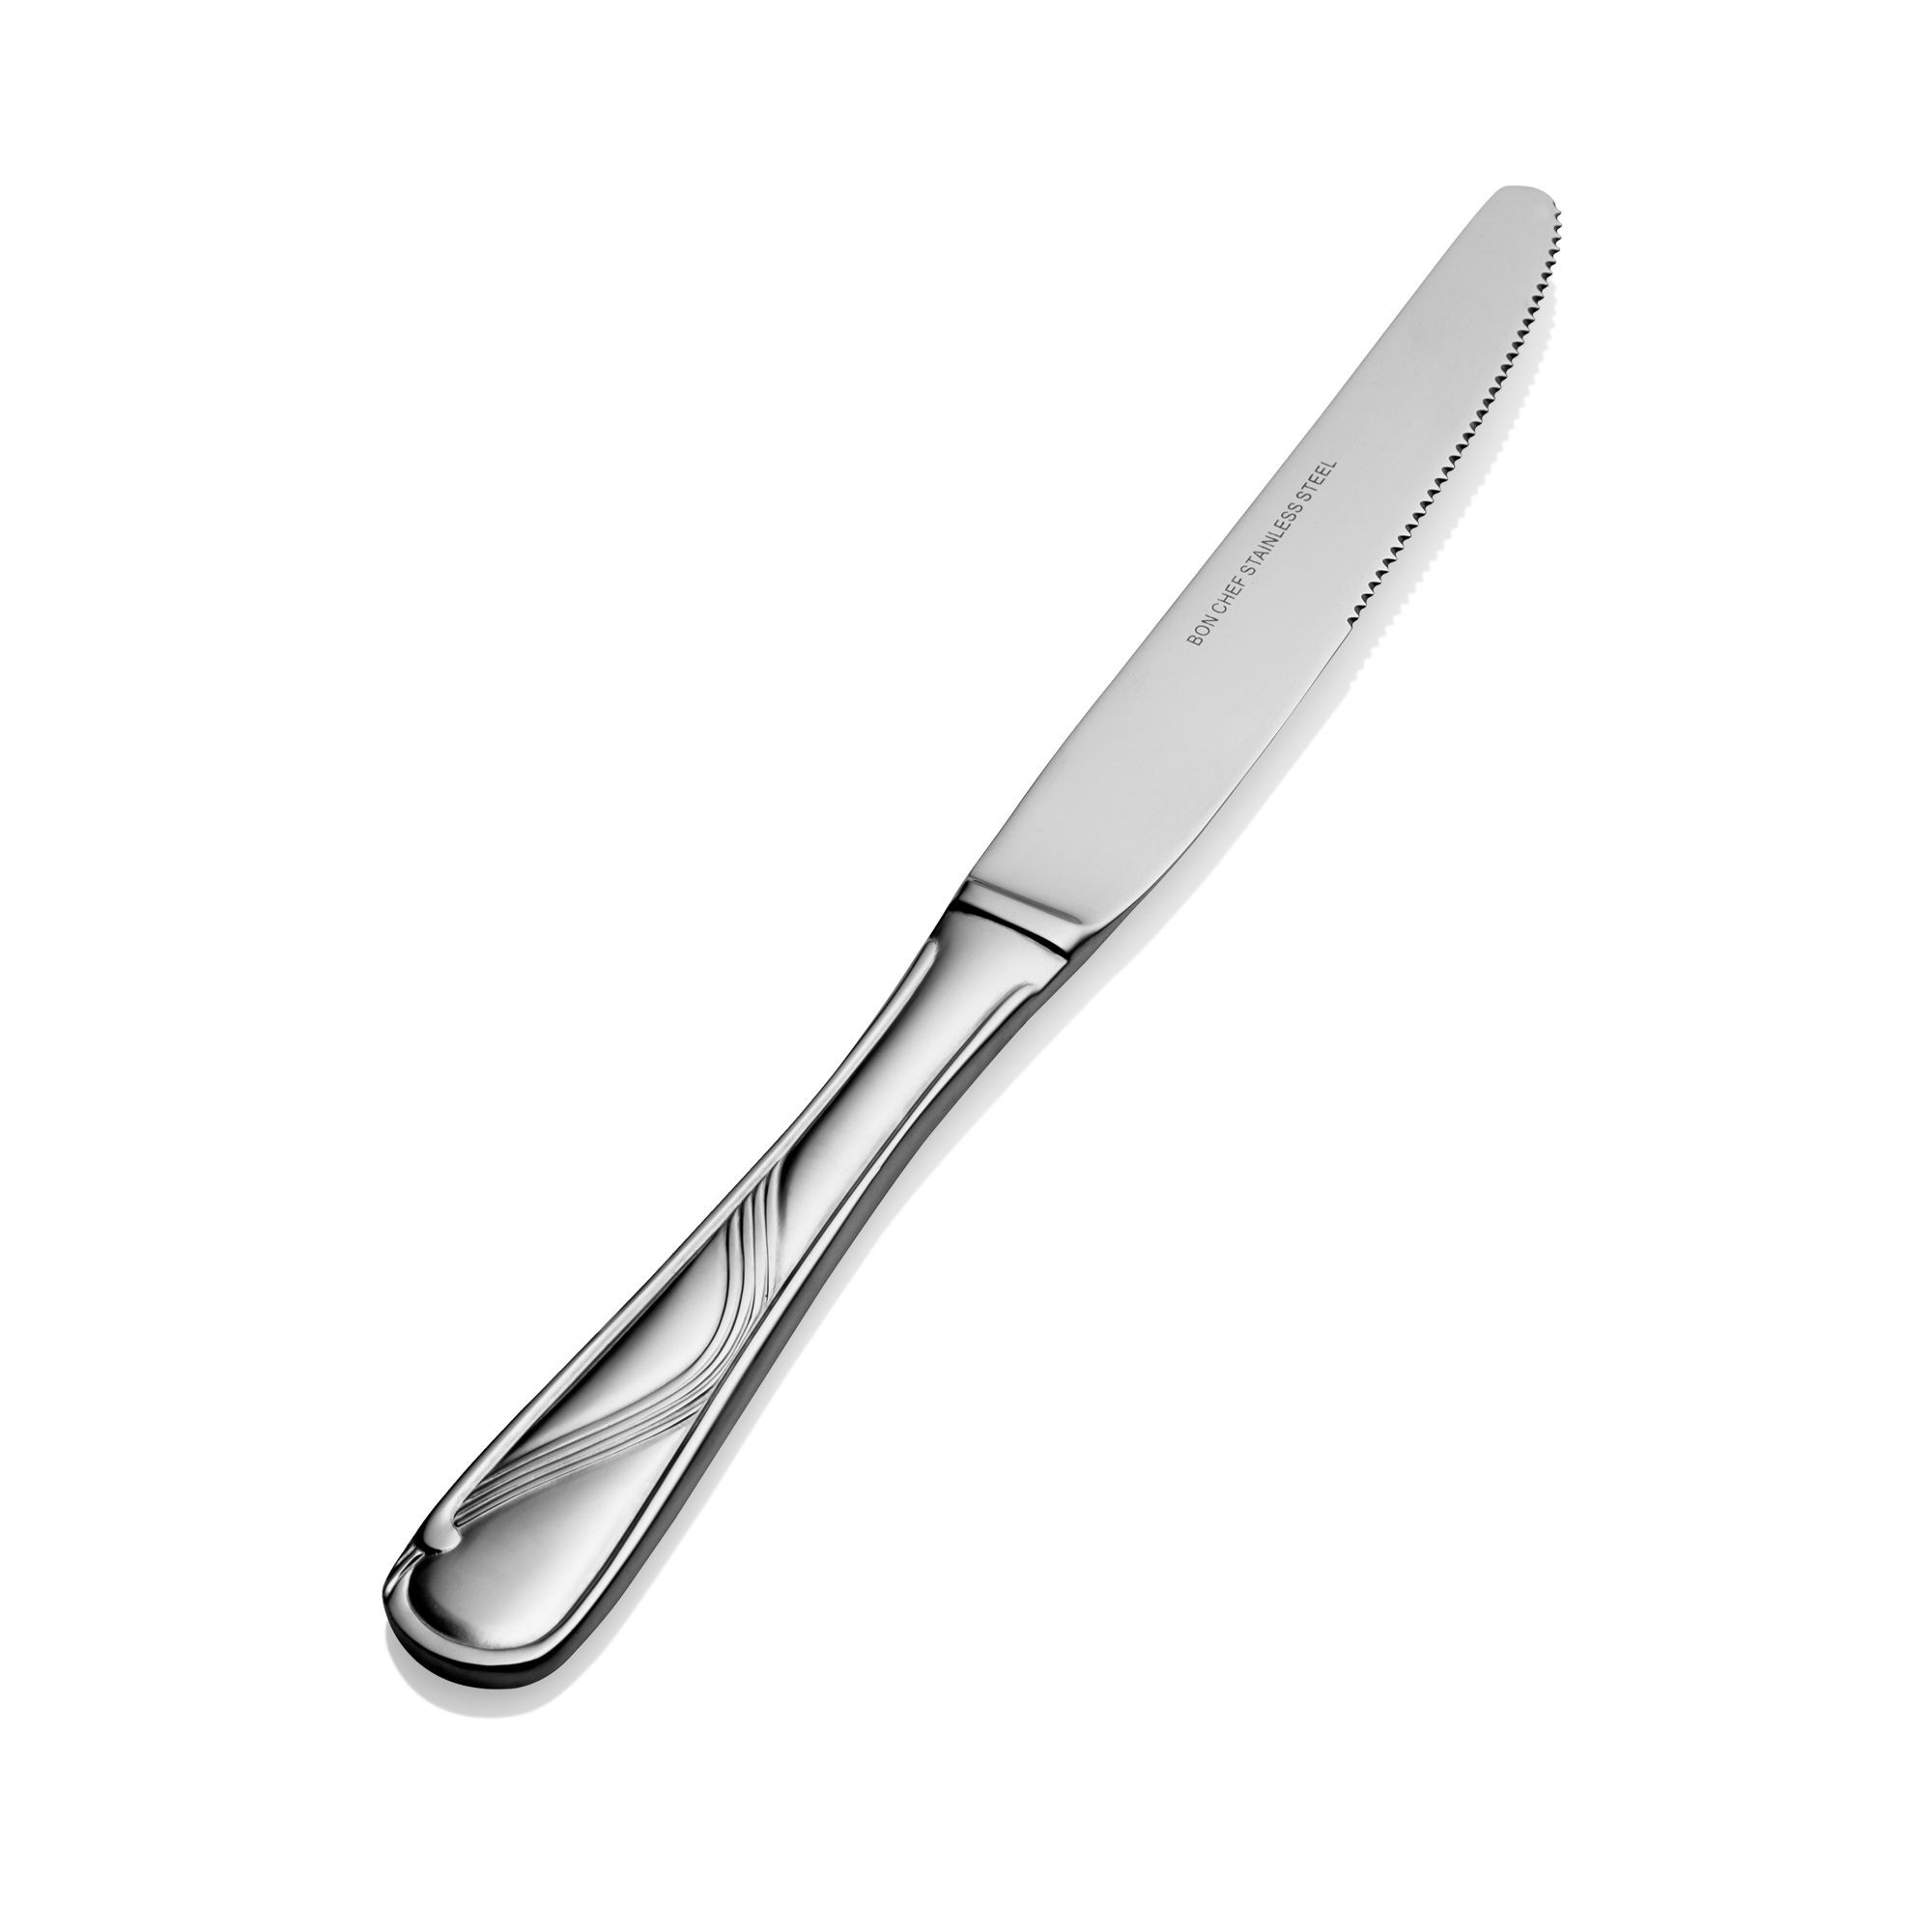 Bon Chef S2212 Wave 18/8 Stainless Steel European Solid Handle Dinner Knife